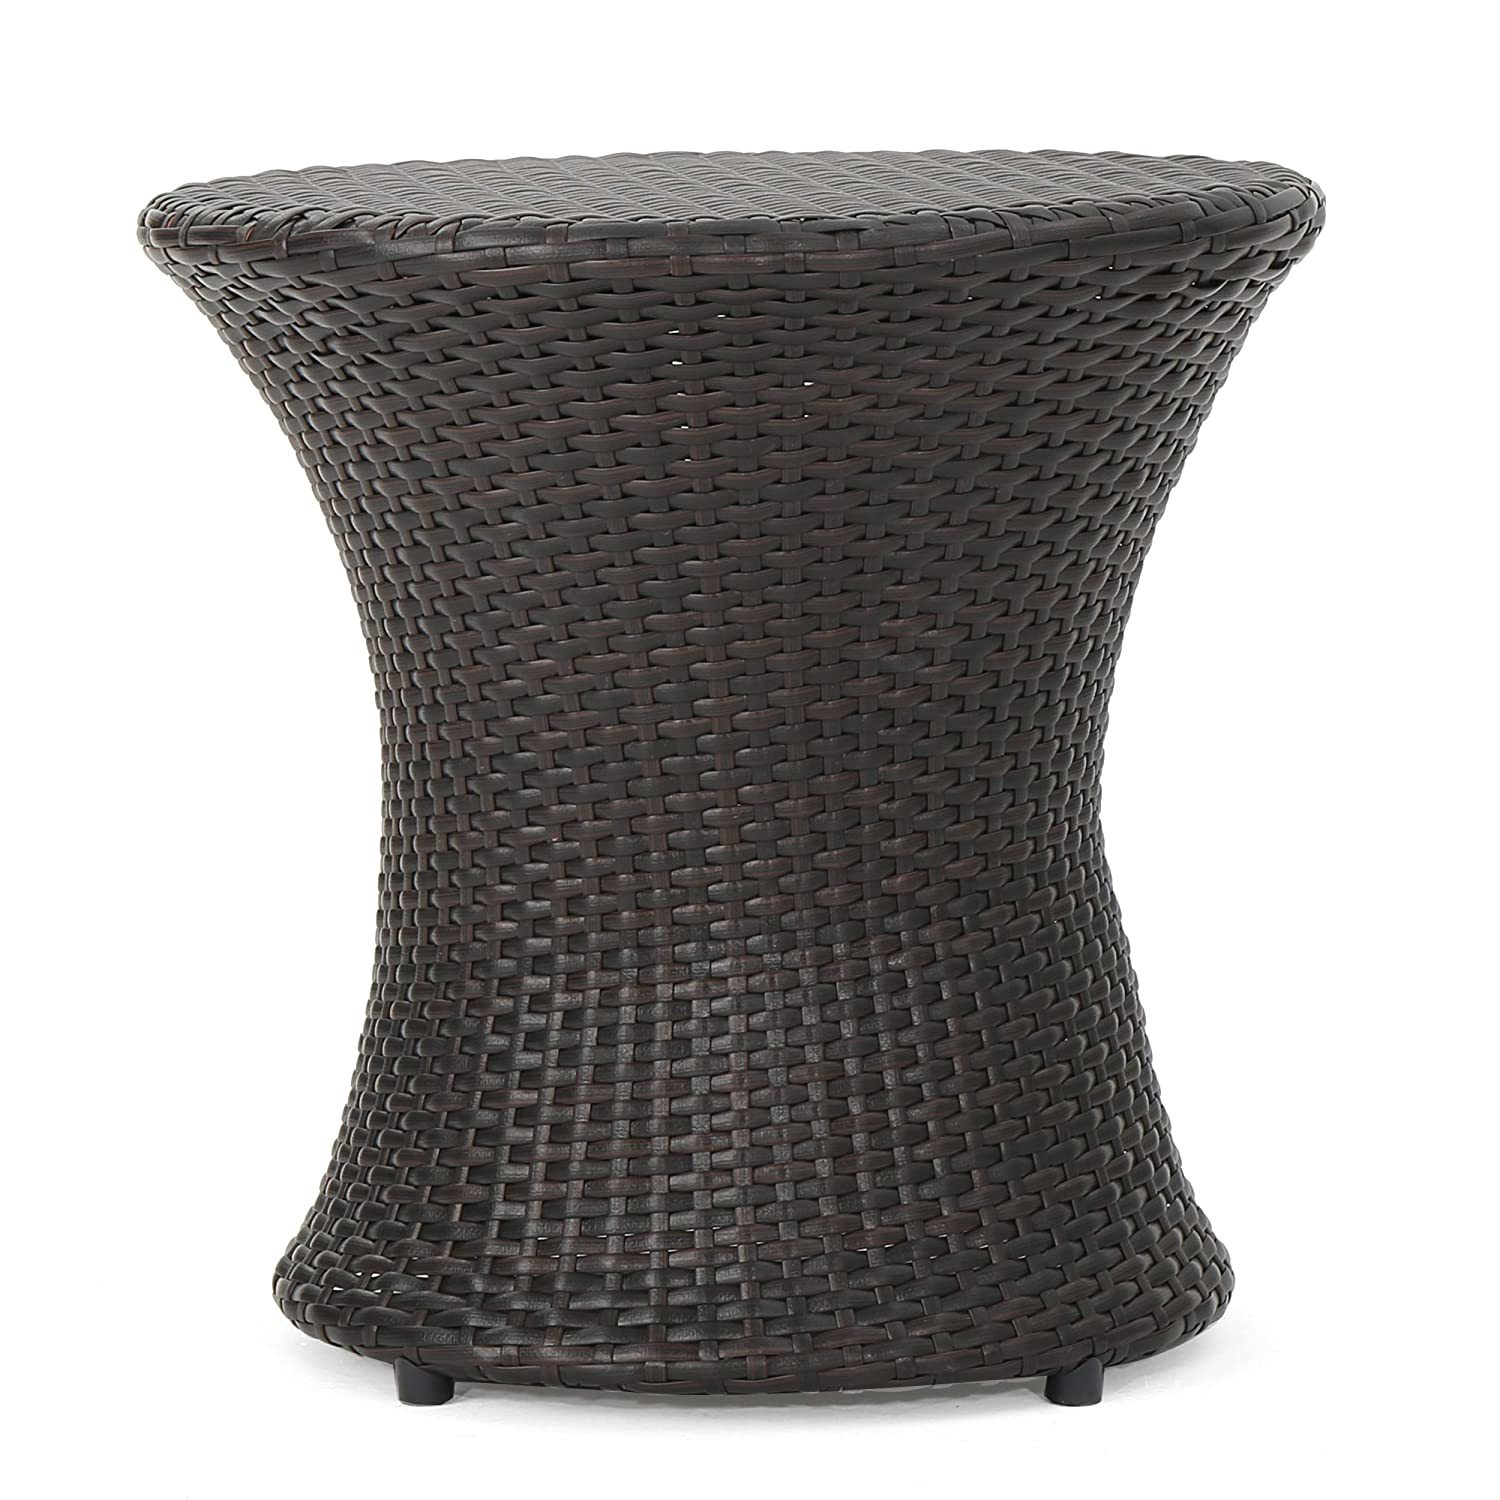 Christopher Knight Home Adriana Outdoor Wicker Accent Table, Multibrow